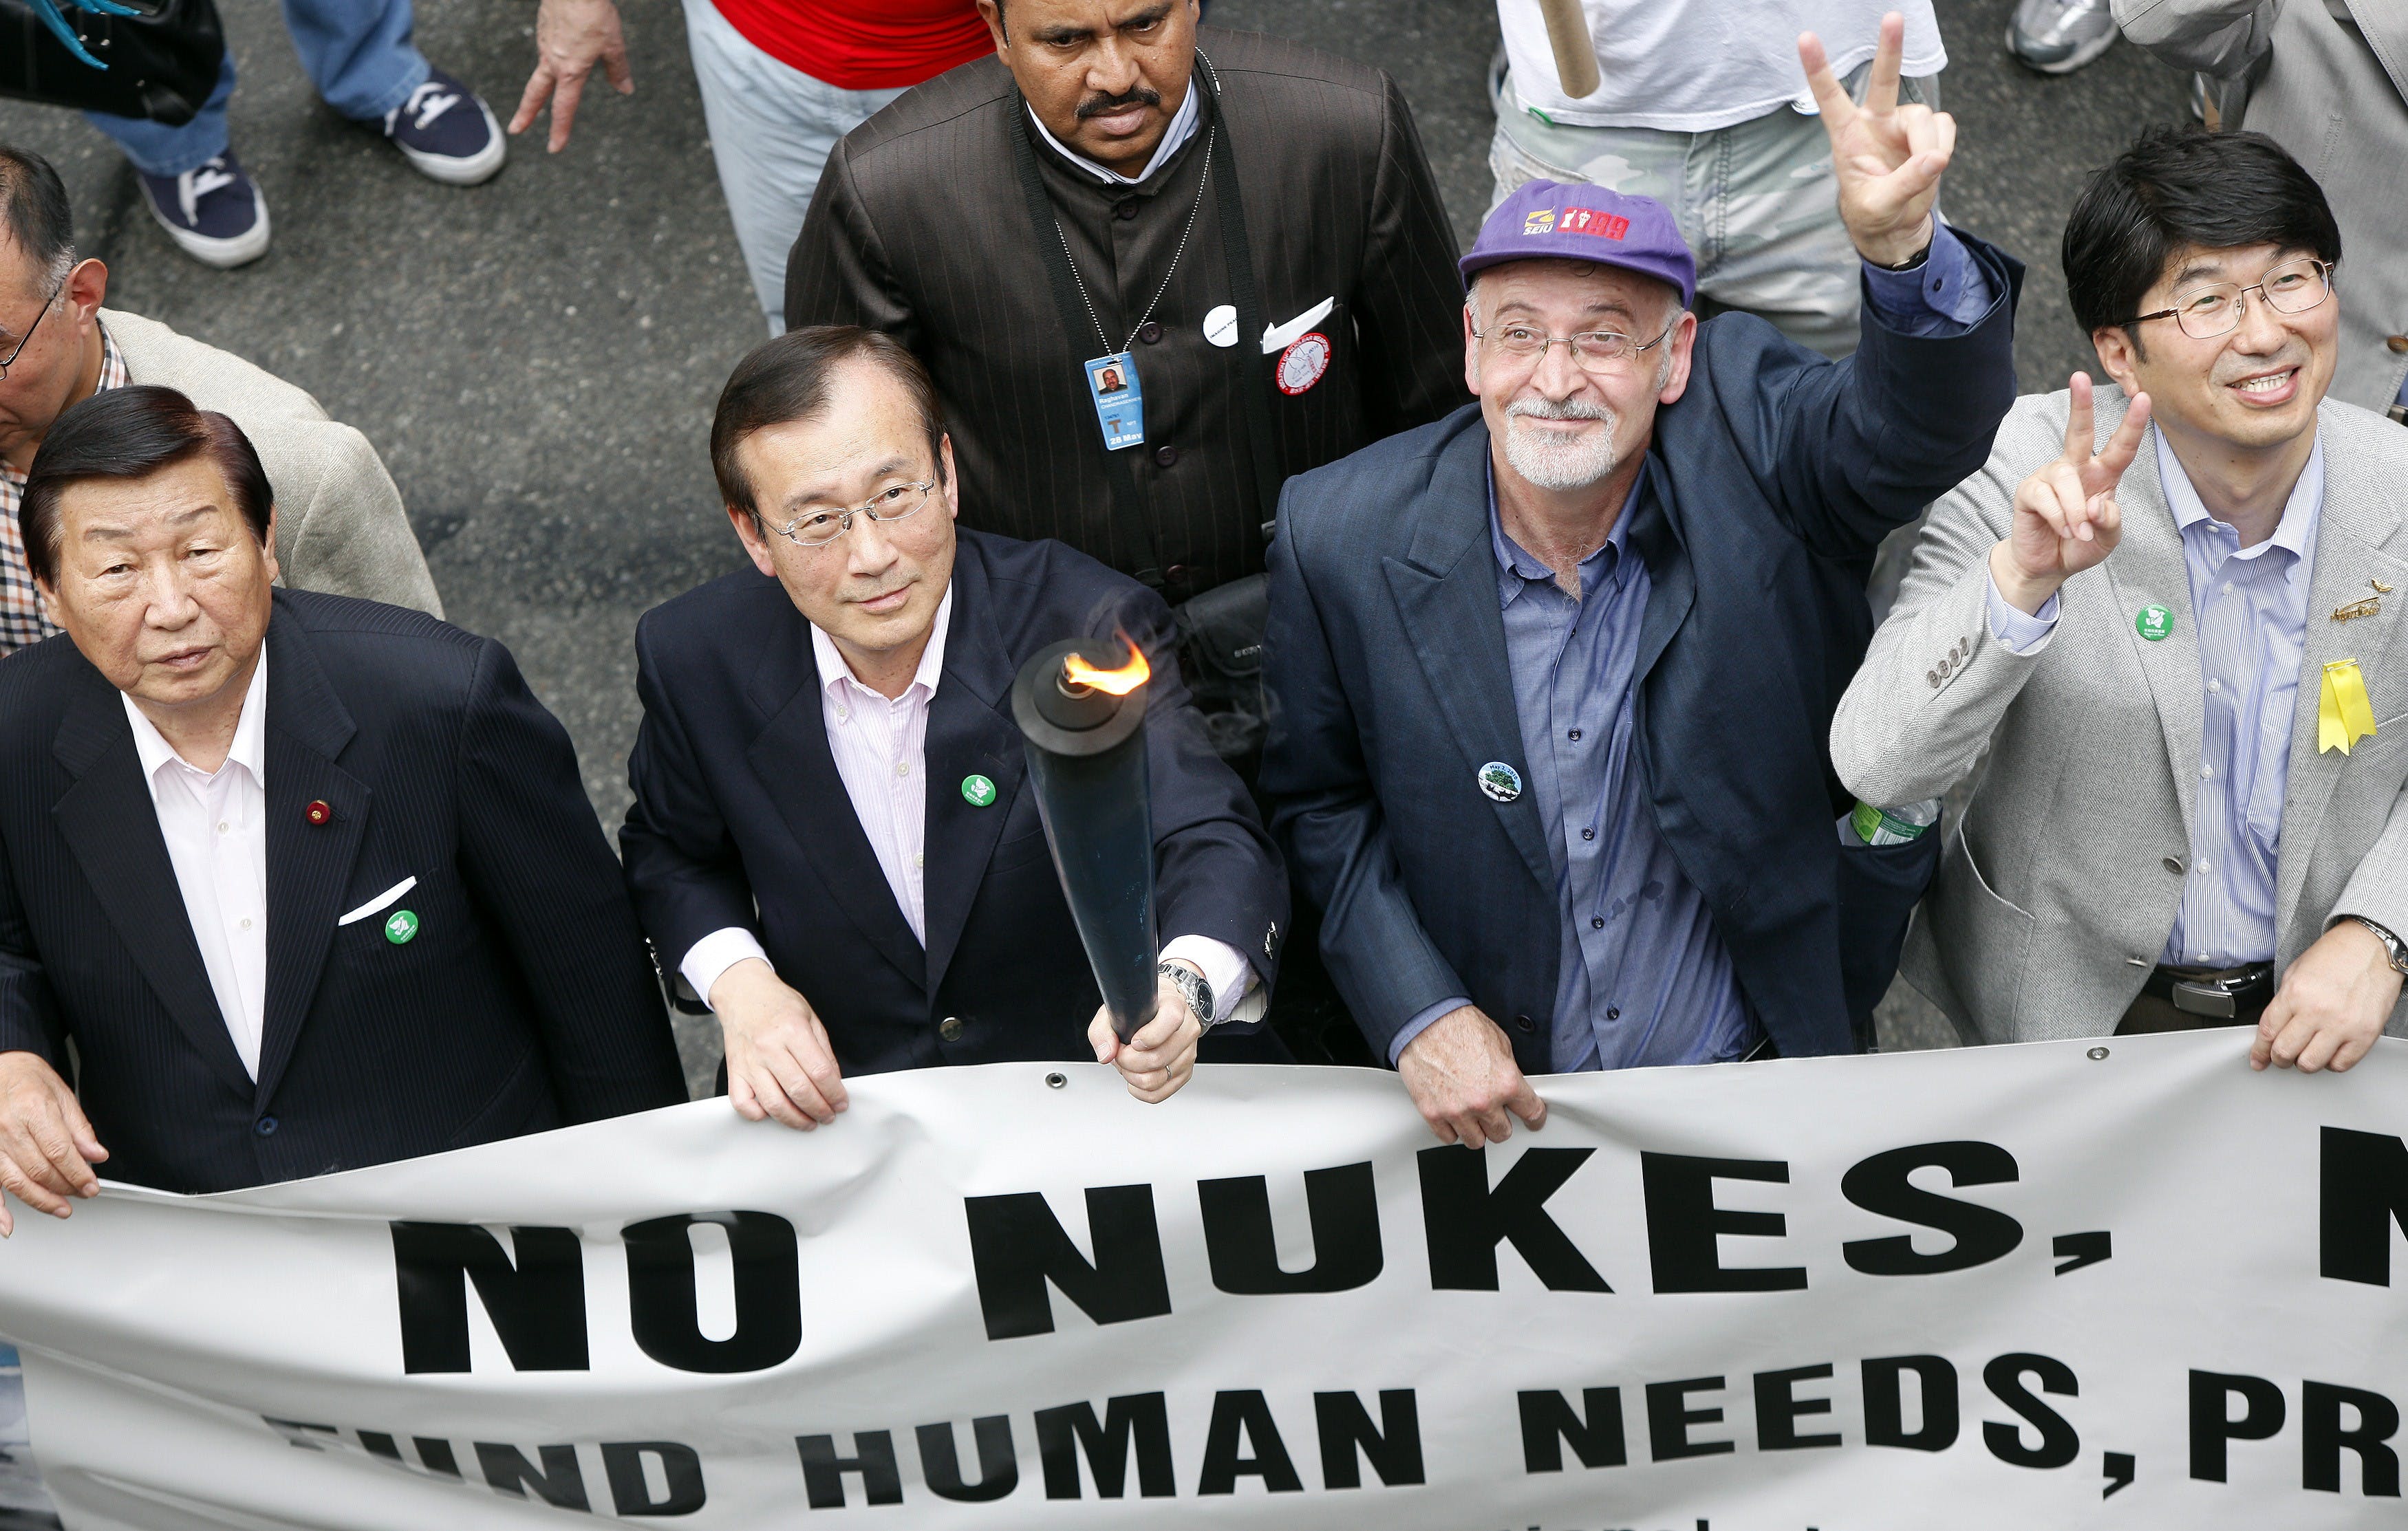 Mayor of Hiroshima Tadatoshi Akiba (2nd L) walks with other mayors including Tomihisa Taue, Mayor of Nagasaki (R), during an anti-nuclear weapons protest rally and march in New York May 2, 2010. Photo Credit: 達志影像/Reuters